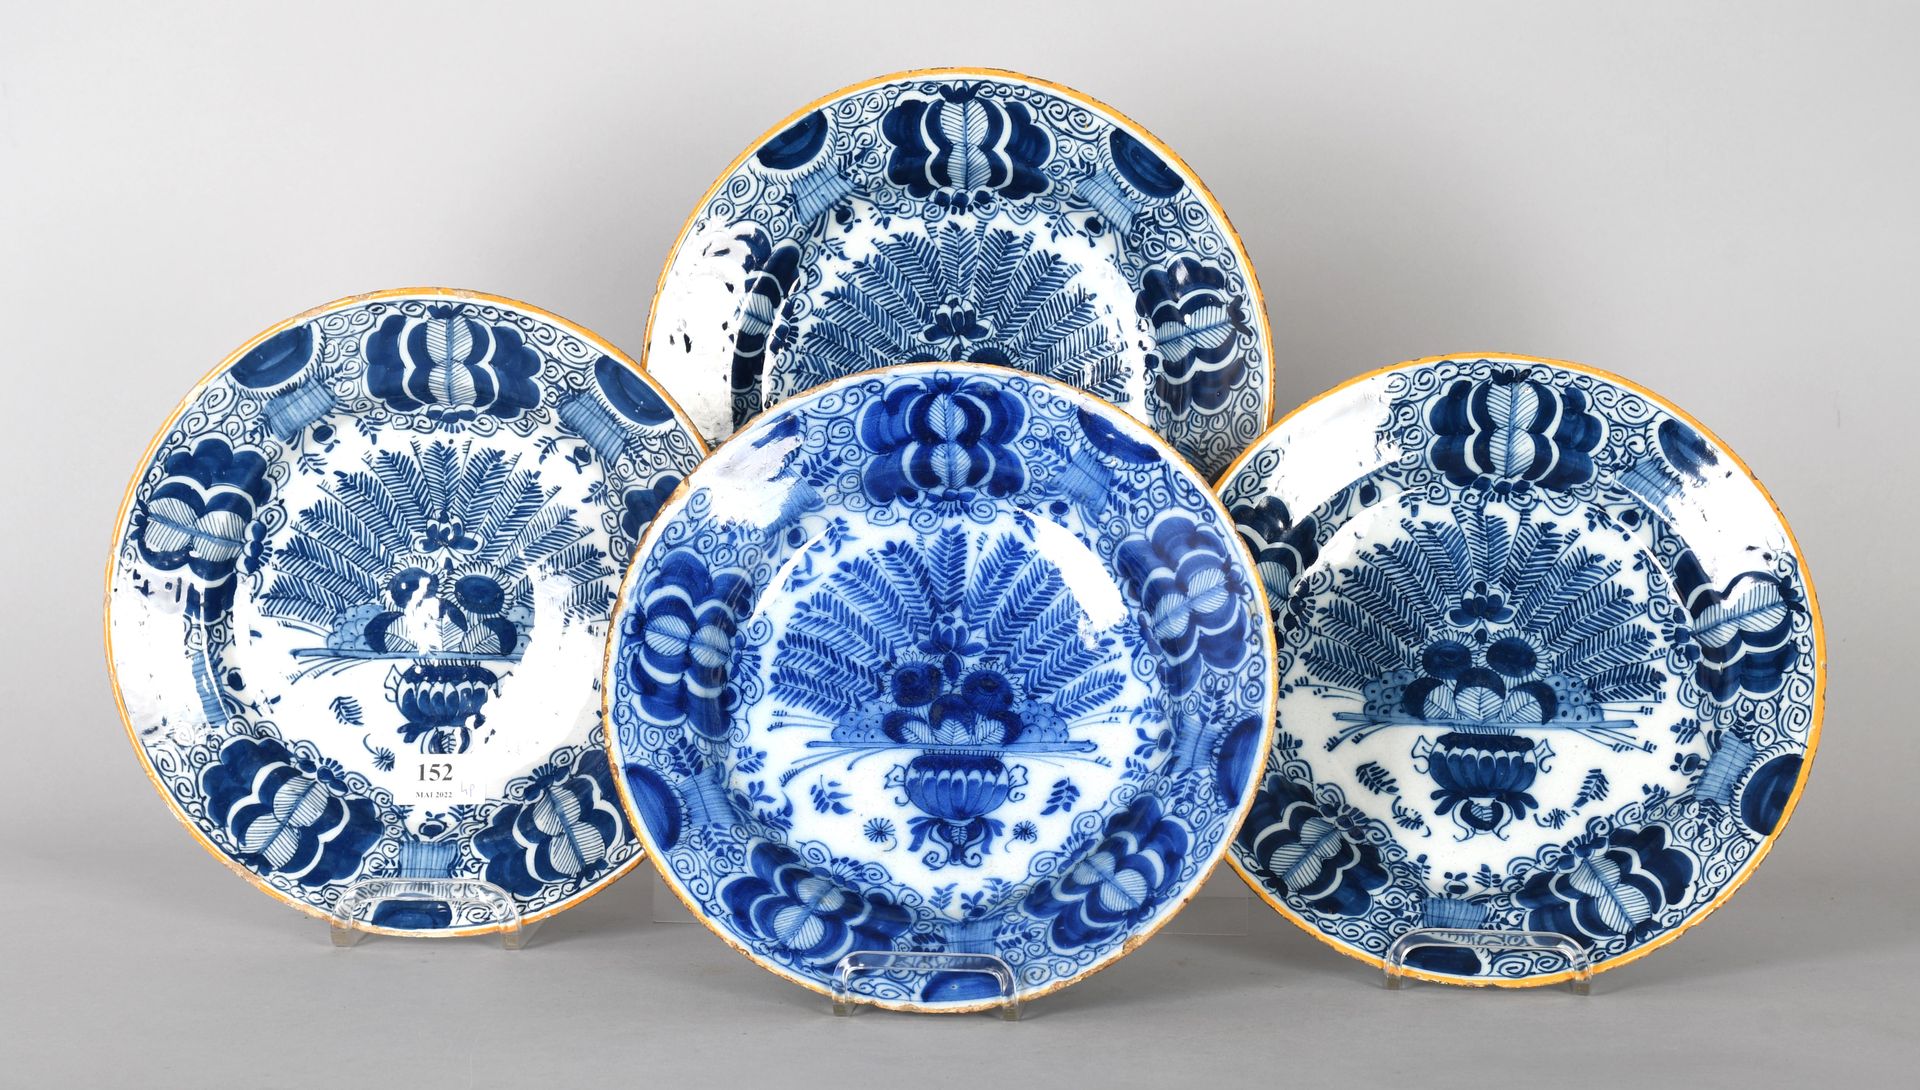 Null Delft, 18th century

Series of four round dishes in white and blue earthenw&hellip;